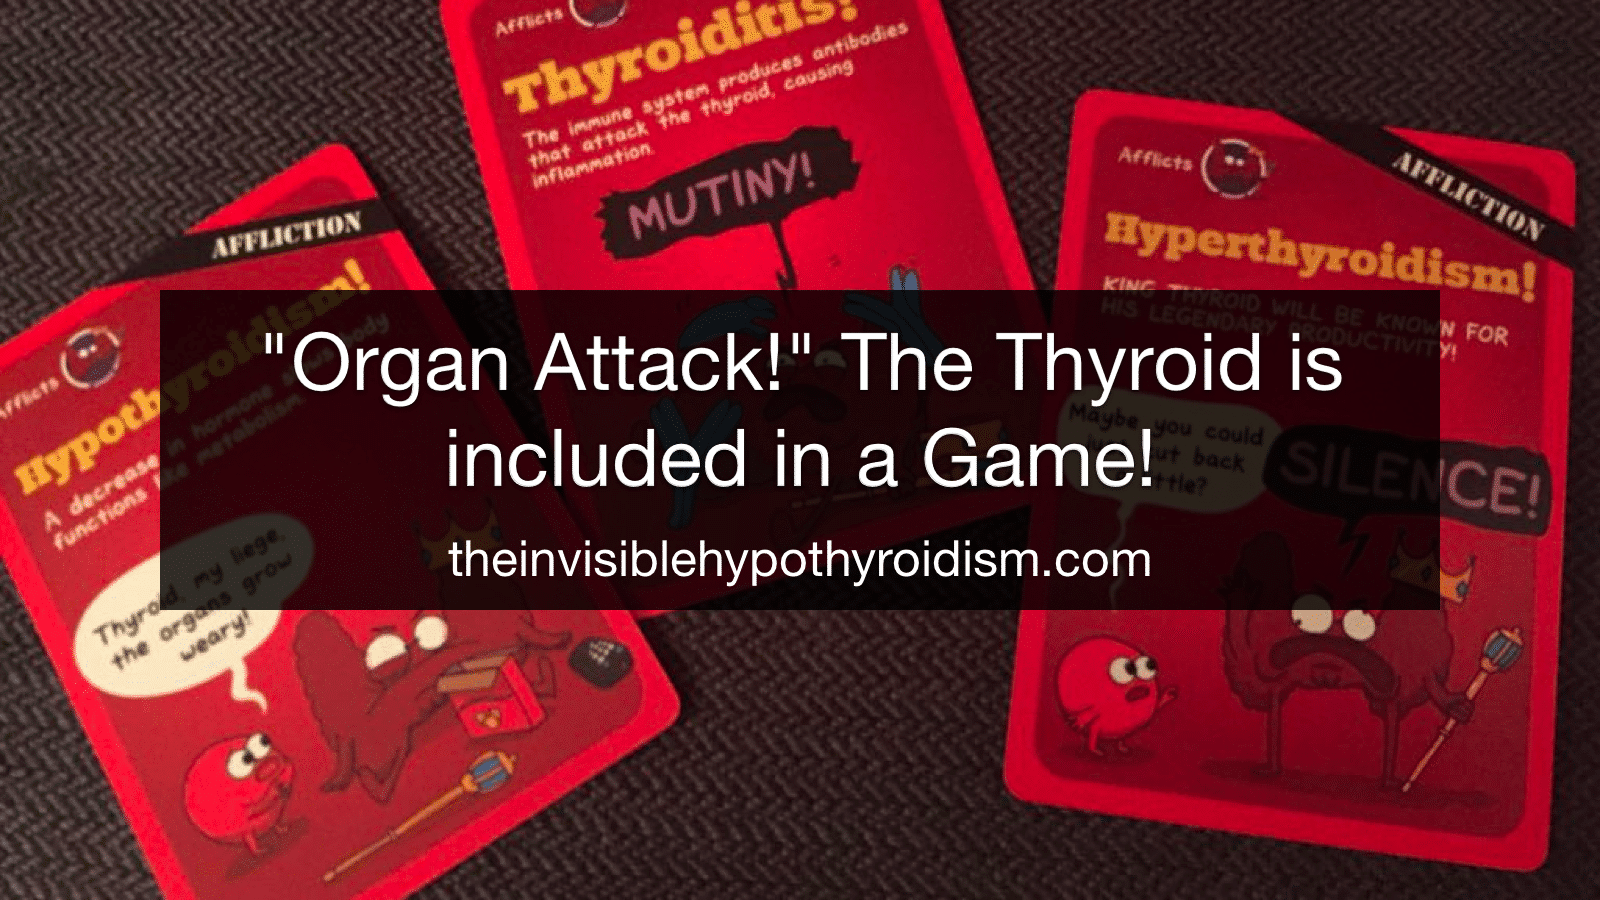 Organ Attack! The Thyroid is included in a Game!